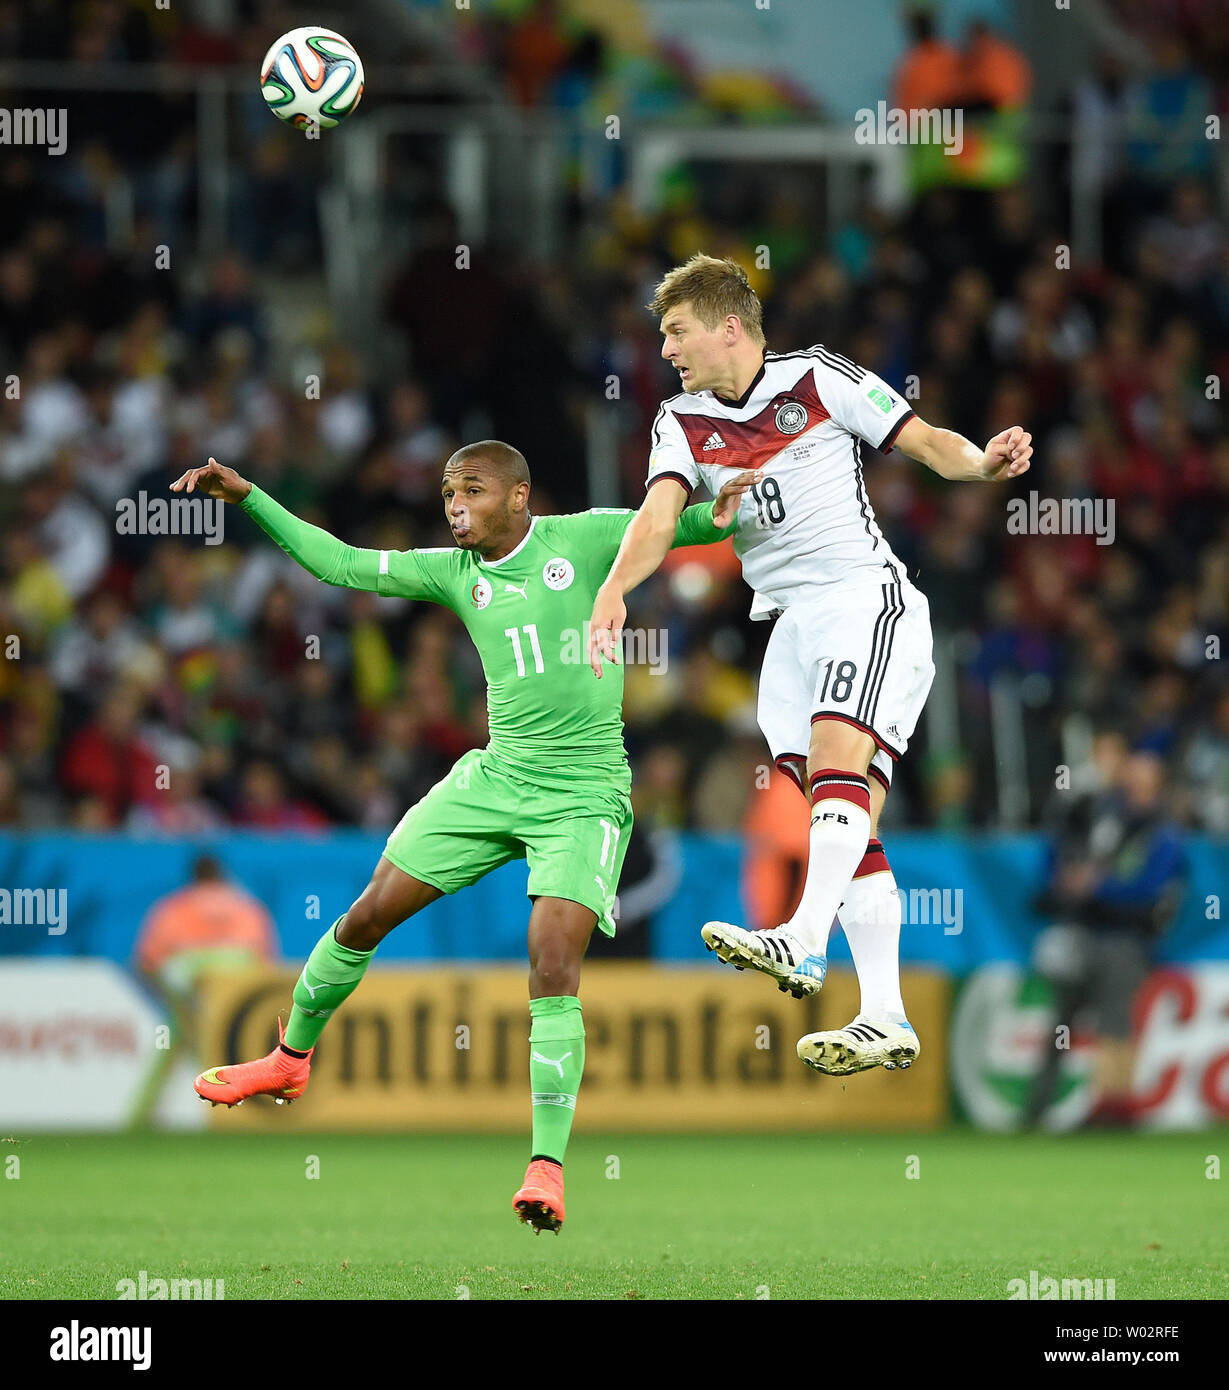 Toni Kroos of Germany jumps with Yacine Brahimi (L) of Algeria during the 2014 FIFA World Cup Round of 16 match at the Estadio Beira-Rio in Porto Alegre, Brazil on June 30, 2014. UPI/Chris Brunskill Stock Photo